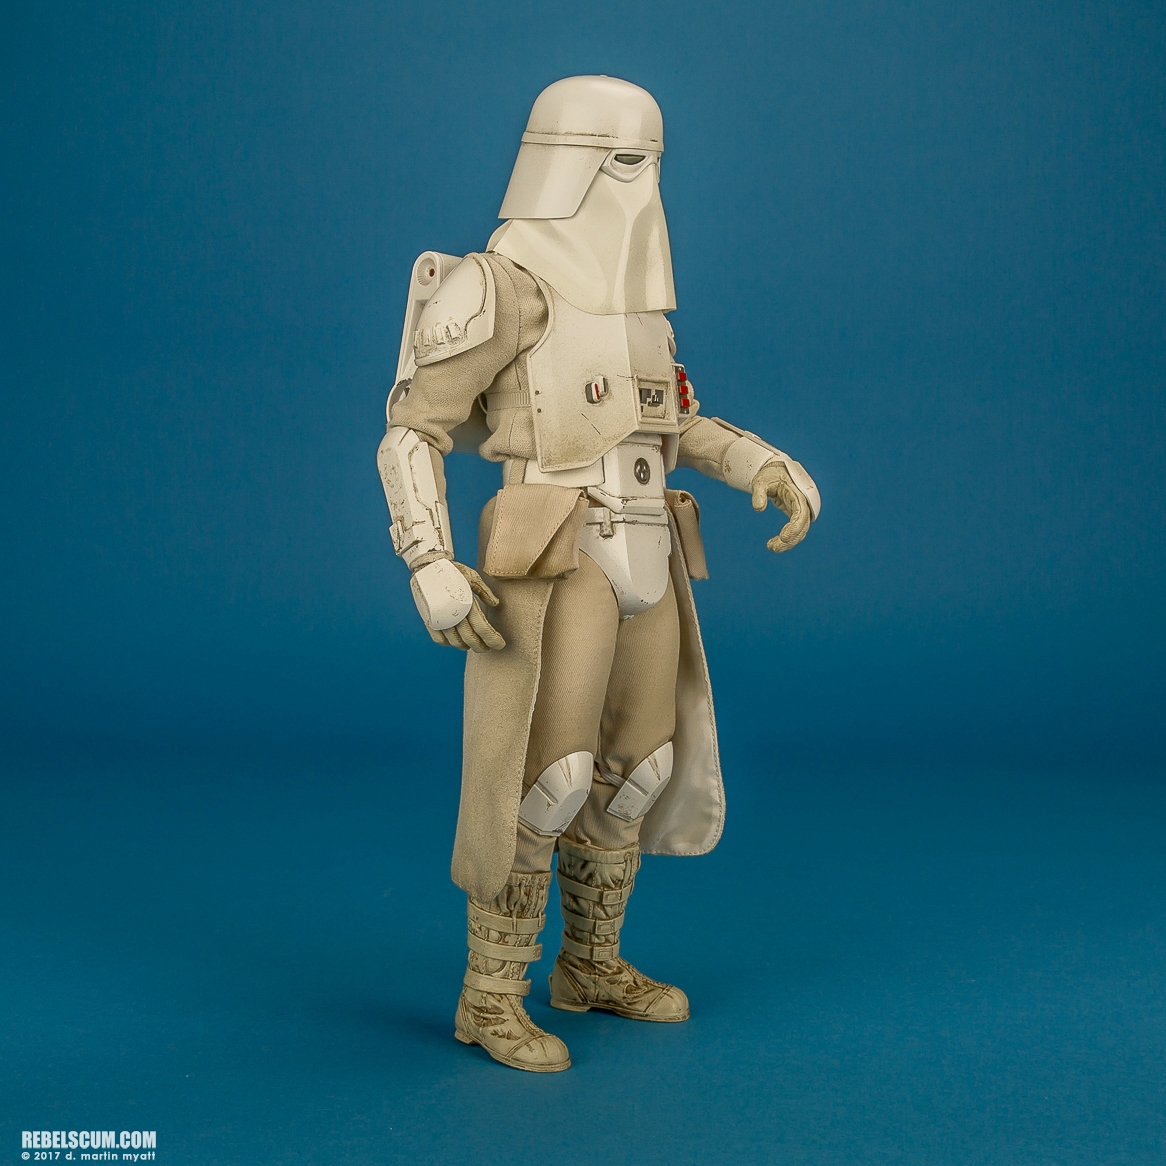 VGM25-Snowtroopers-Two-Pack-Hot-Toys-002.jpg